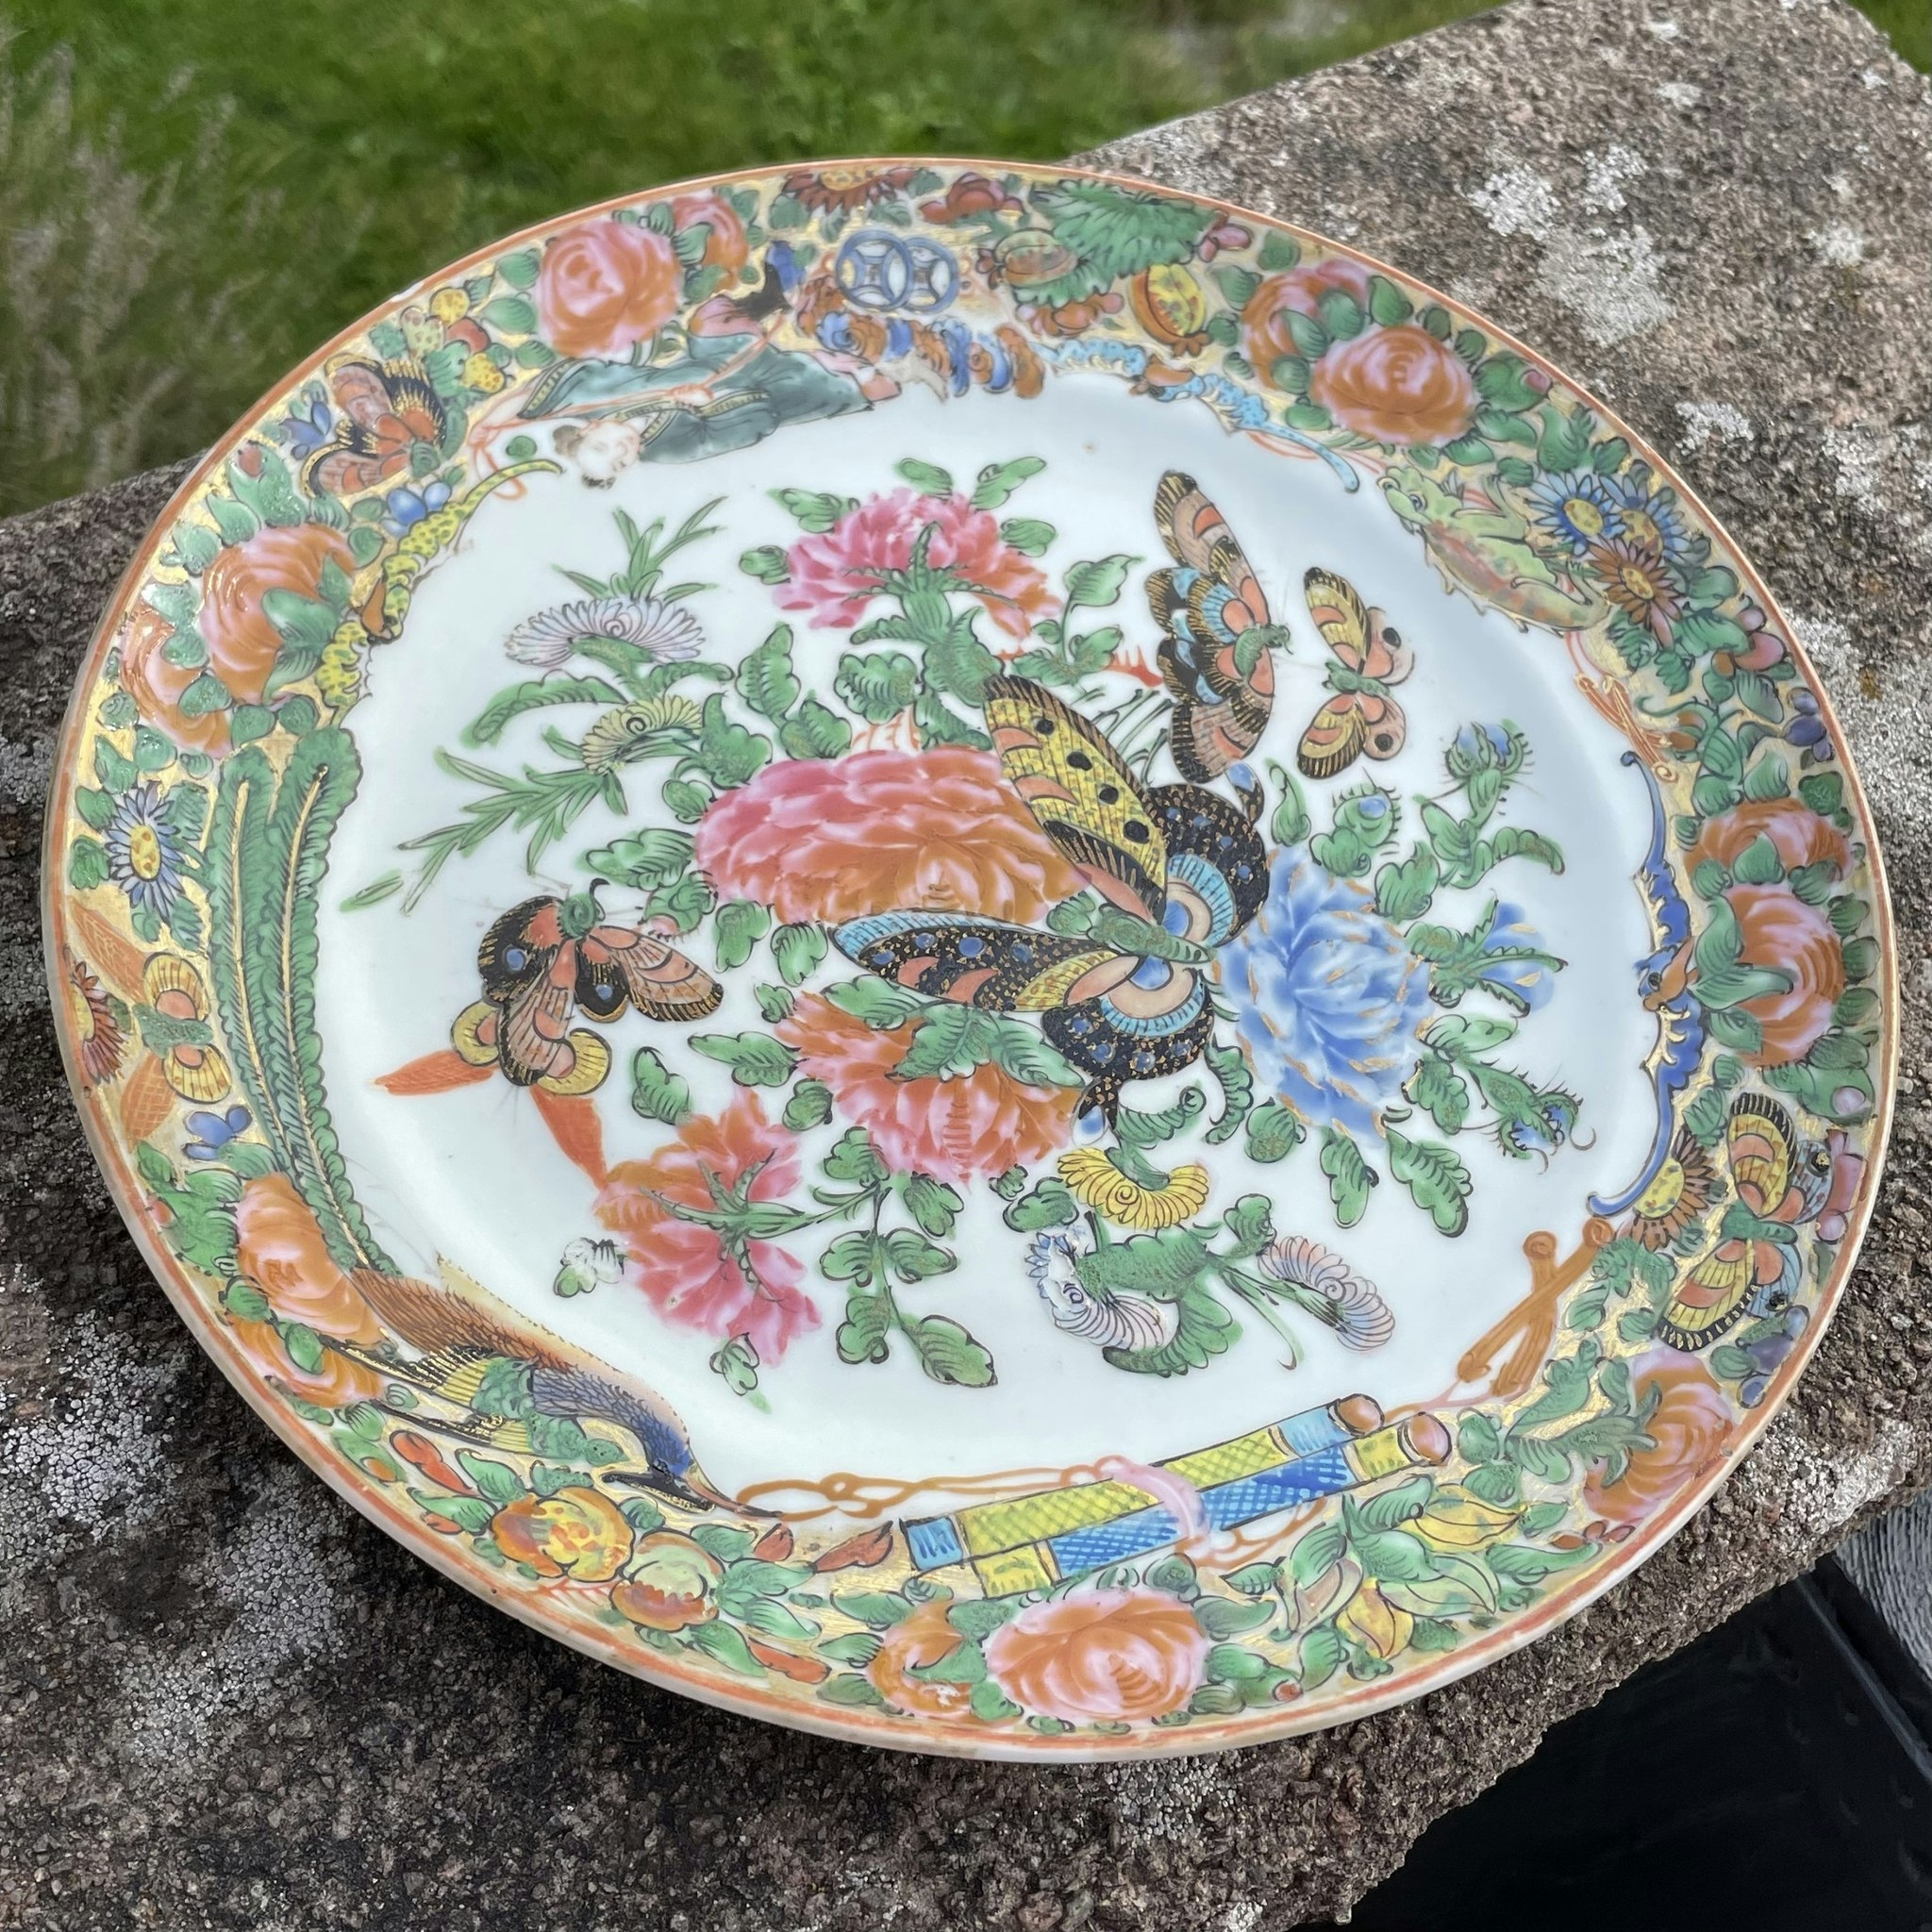 Chinese Antique Rose Butterfly Plate, Late Qing Dynasty, 19th Century #1639